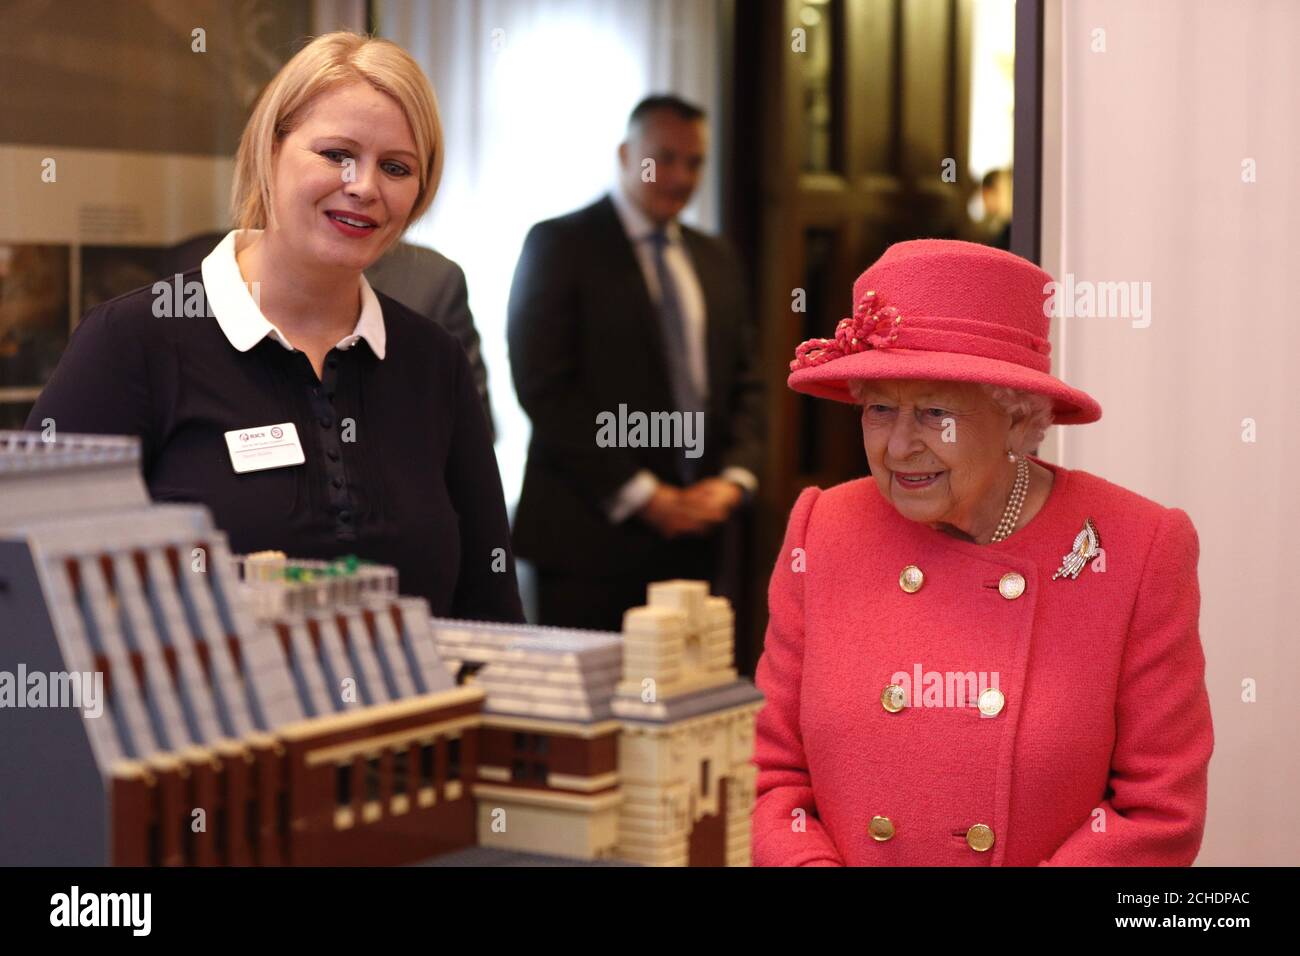 Queen Elizabeth II views a model of the building during a visit to the Royal Institution of Chartered Surveyors (RICS) in London, to mark its 150th anniversary. Stock Photo